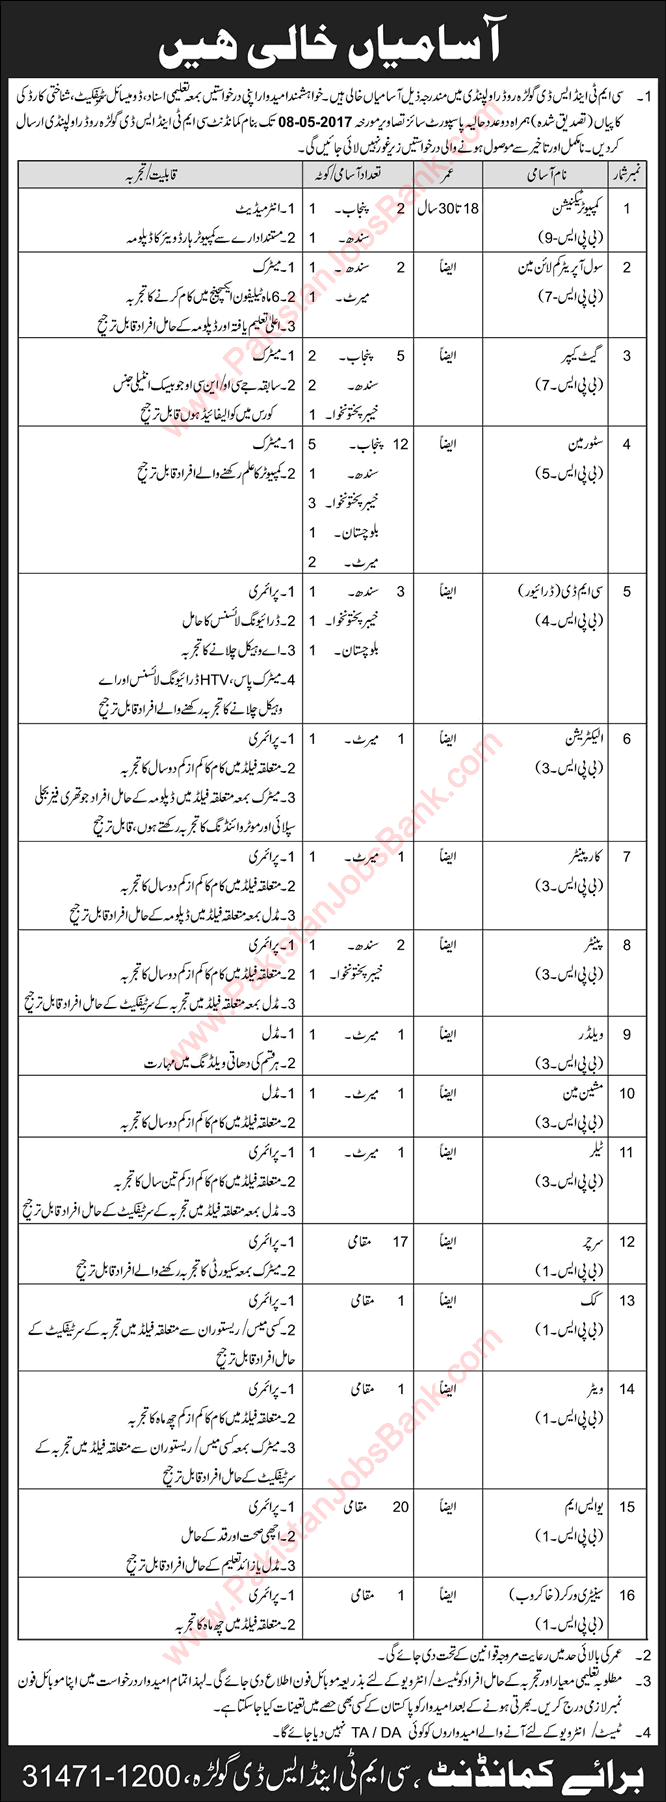 Central Mechanical Transport and Stores Depot Rawalpindi Jobs 2017 April CMT & SD Storemen, Searchers & Others Latest